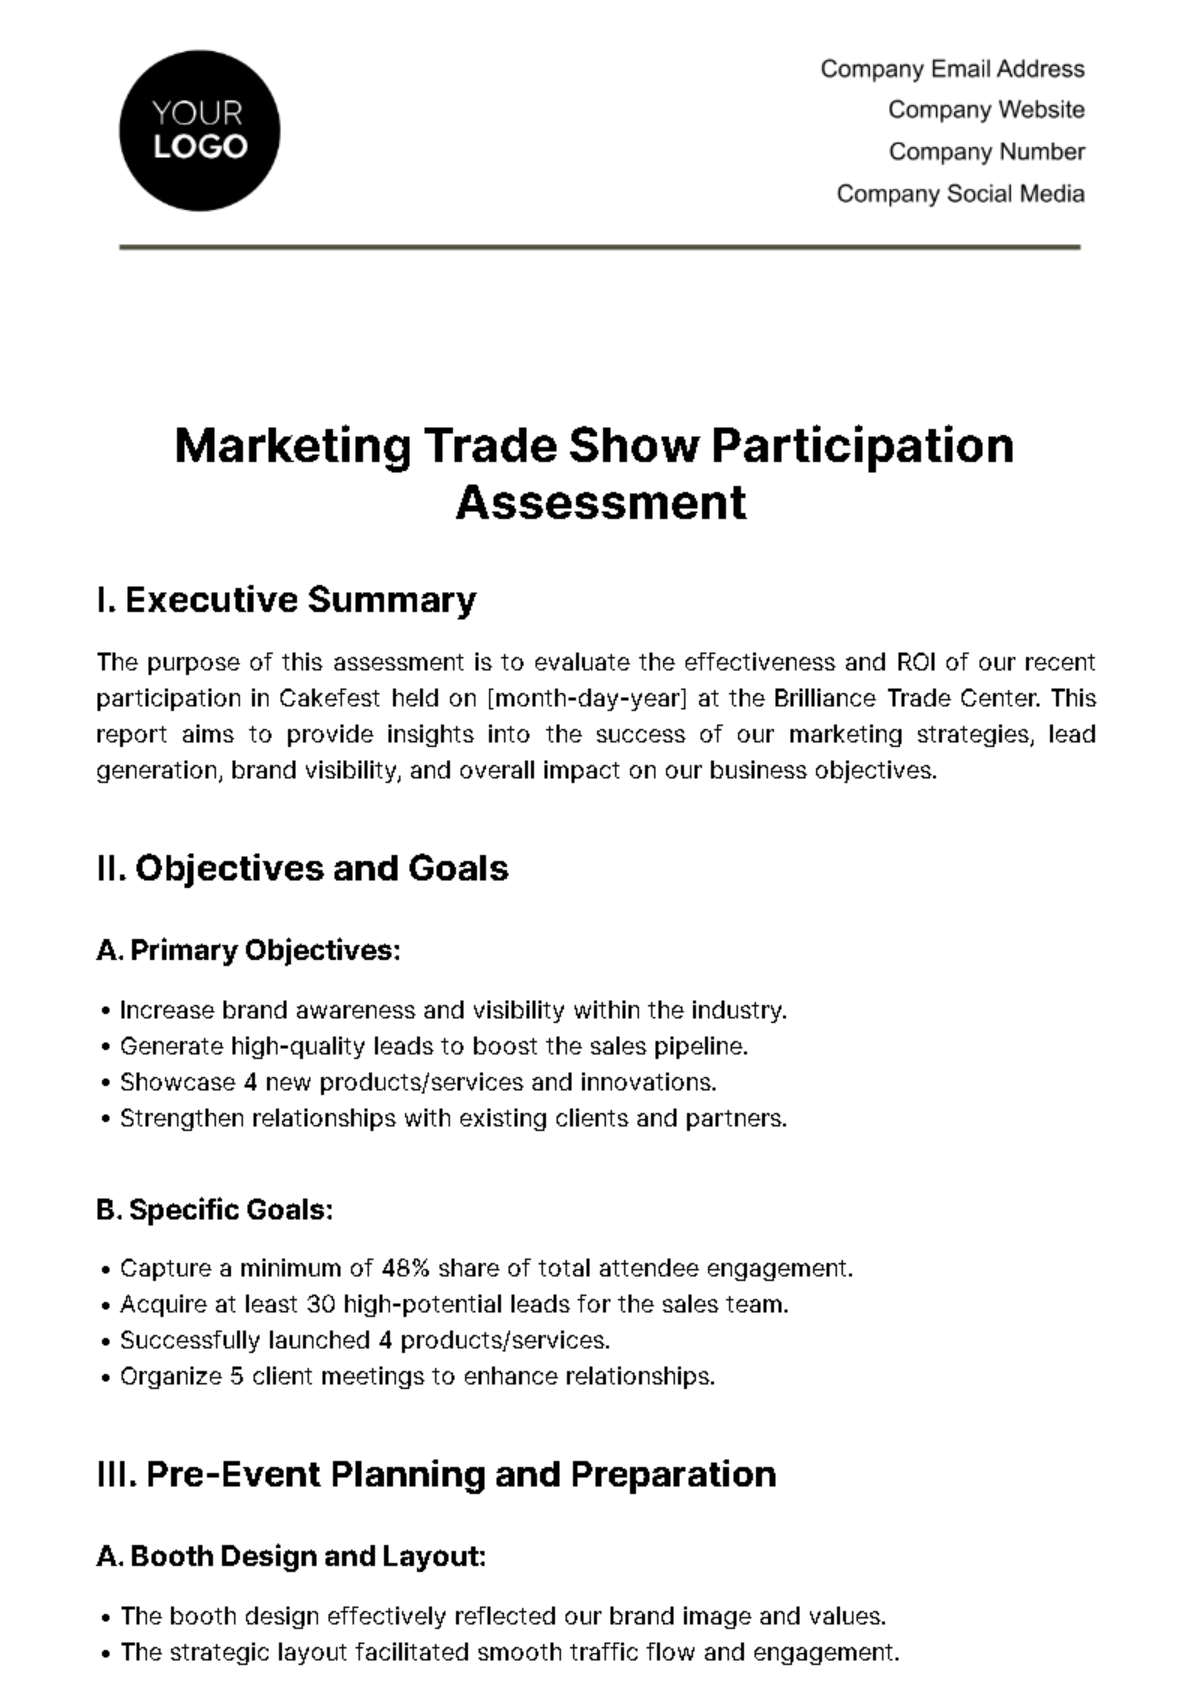 Free Marketing Trade Show Participation Assessment Template